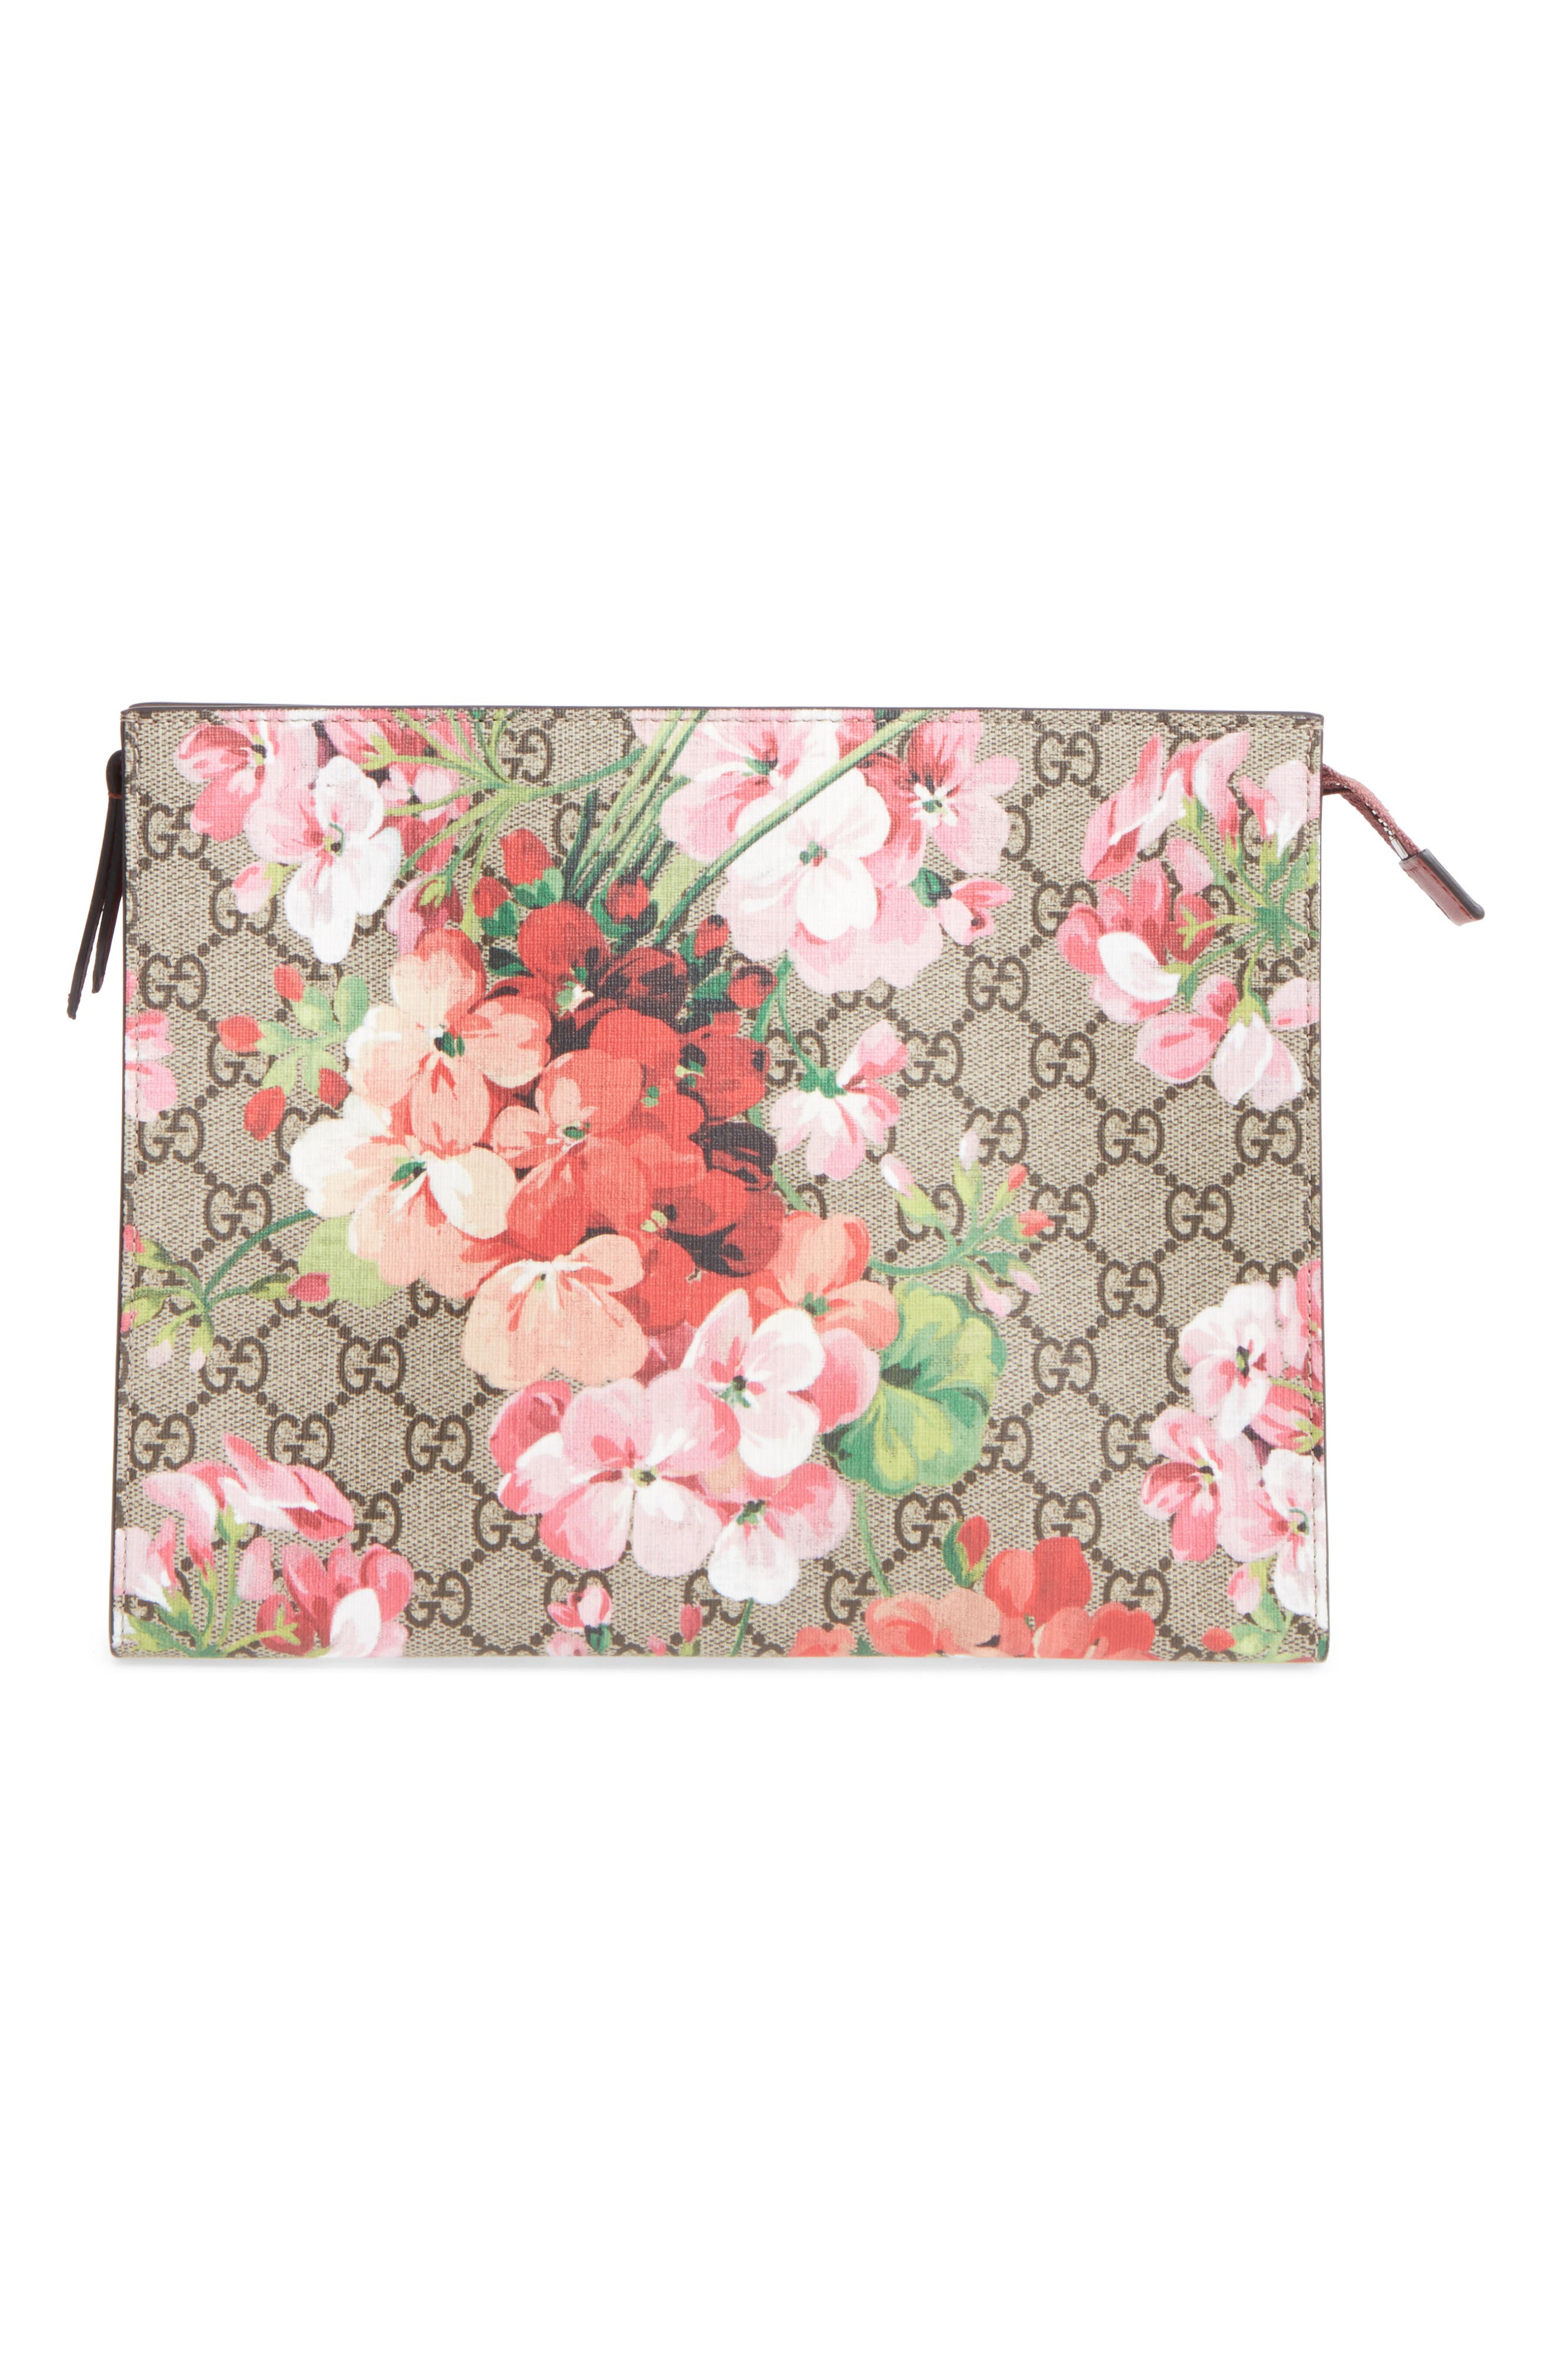 Gucci Large GG Blooms Canvas \u0026 Leather 